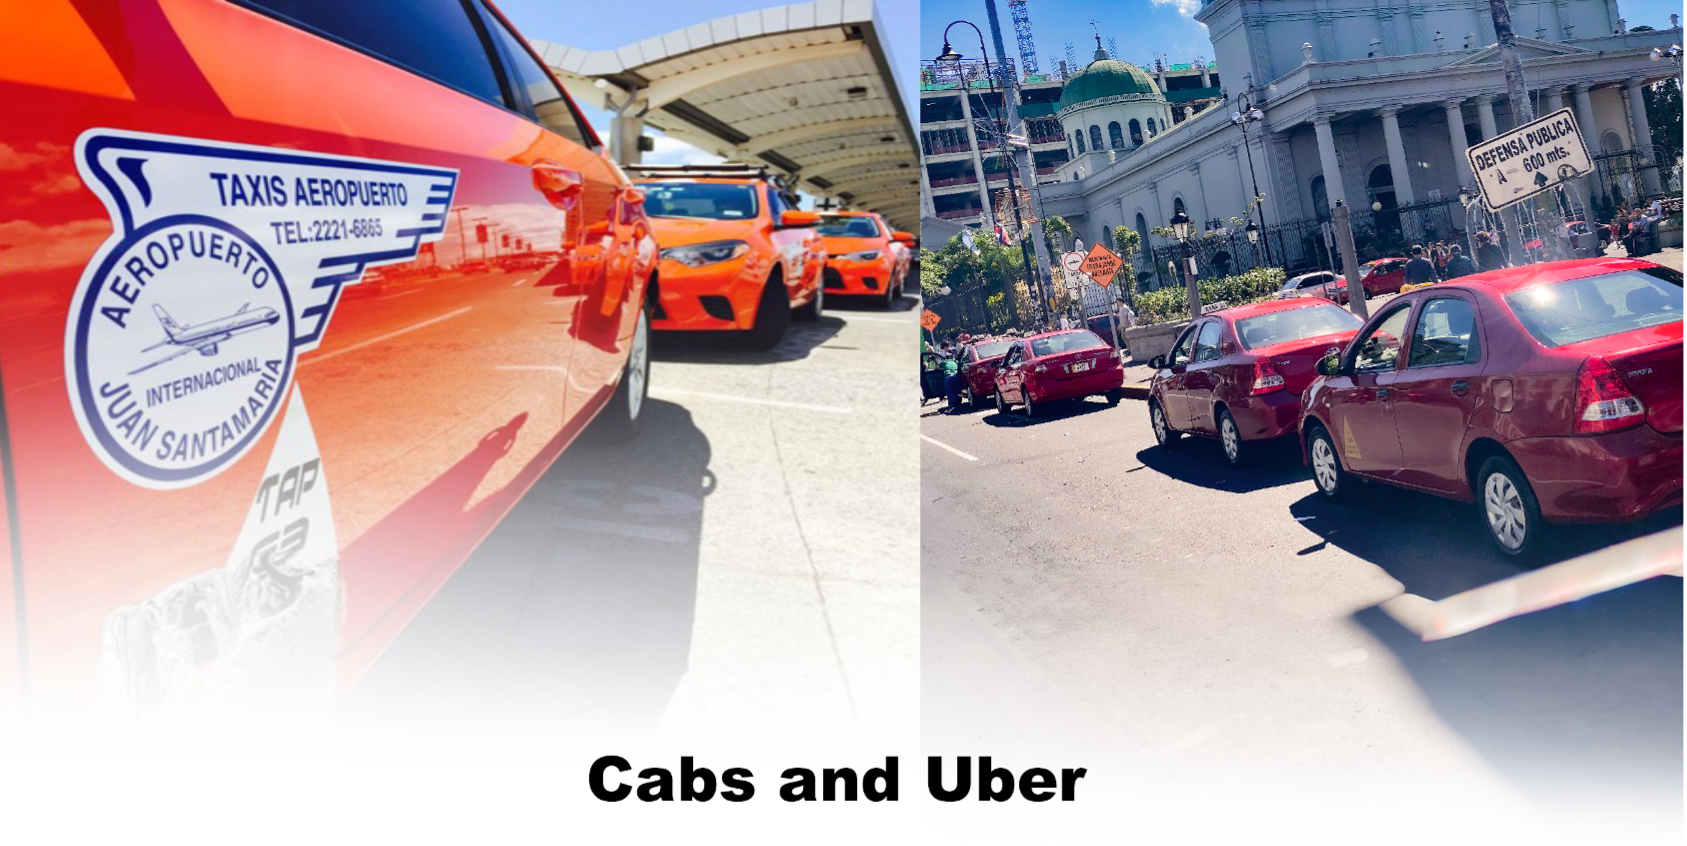 Images of Cabs and Uber Drivers in Costa Rica